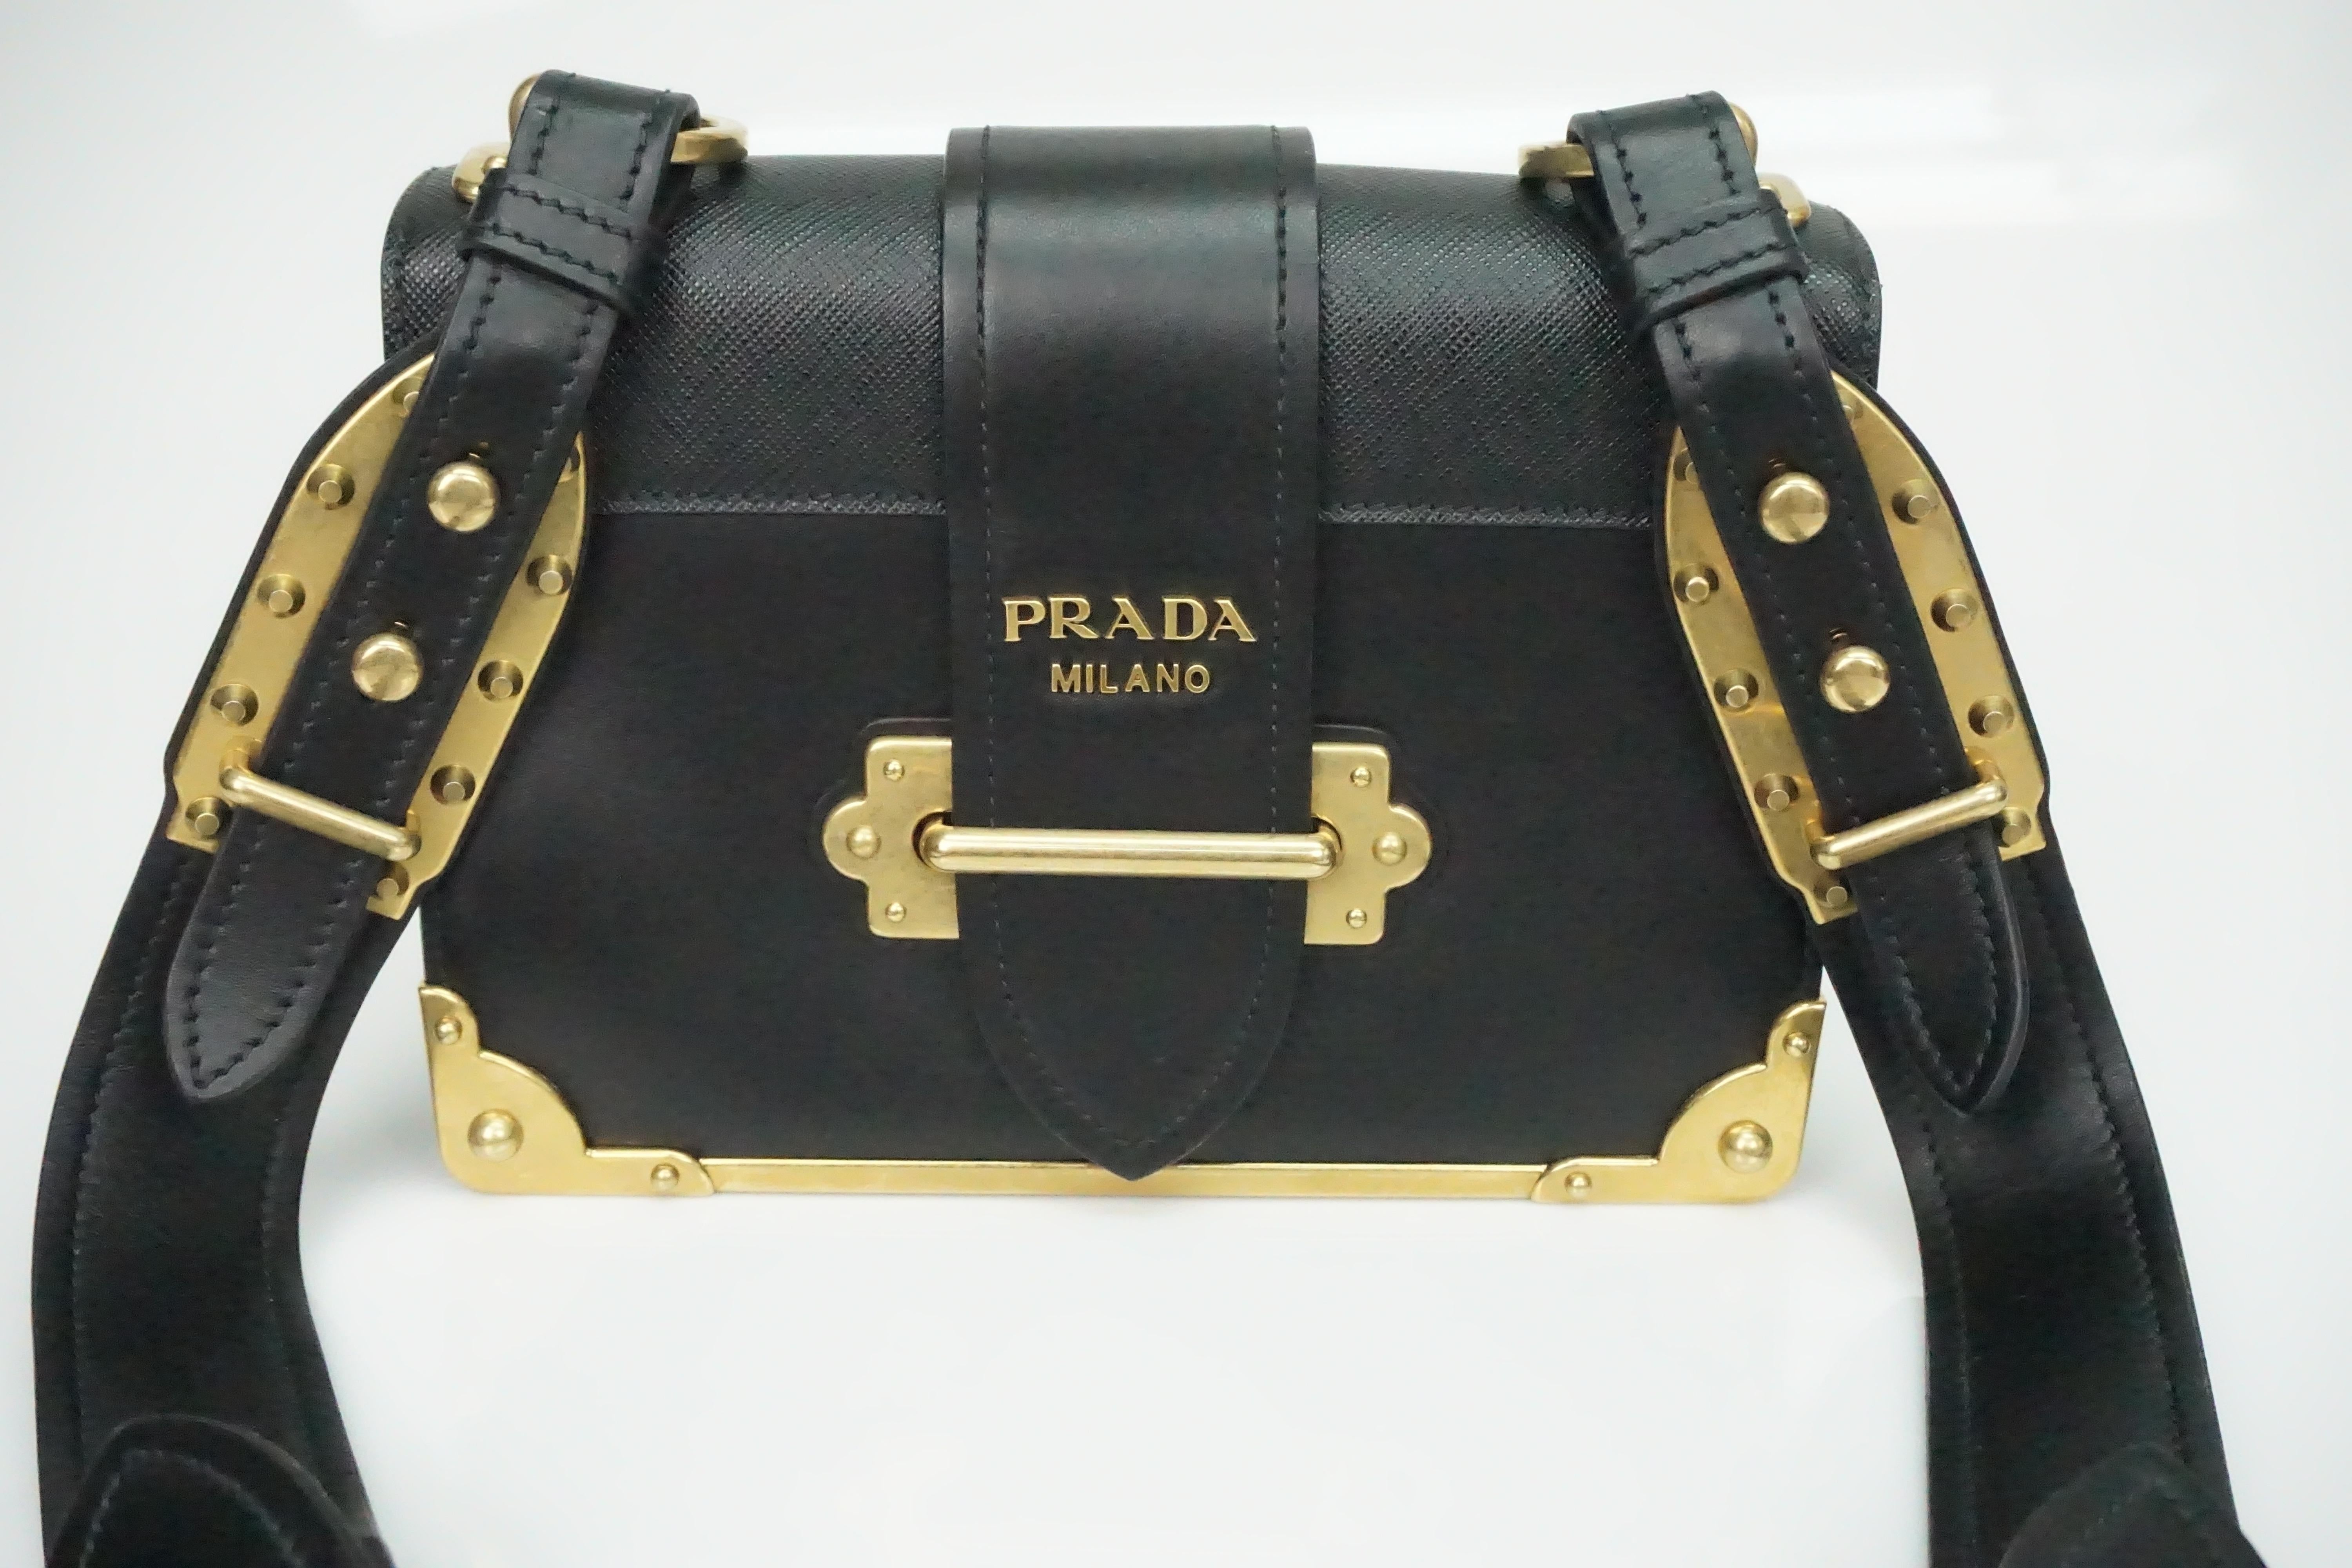 Prada Black Cahier Shoulder Bag W/ Gold Hardware   This fantastic bag is in excellent condition. There are gold metal plates on the bottom front and back of the bag. There are also golden plates on the beginning and the end of the straps with stud